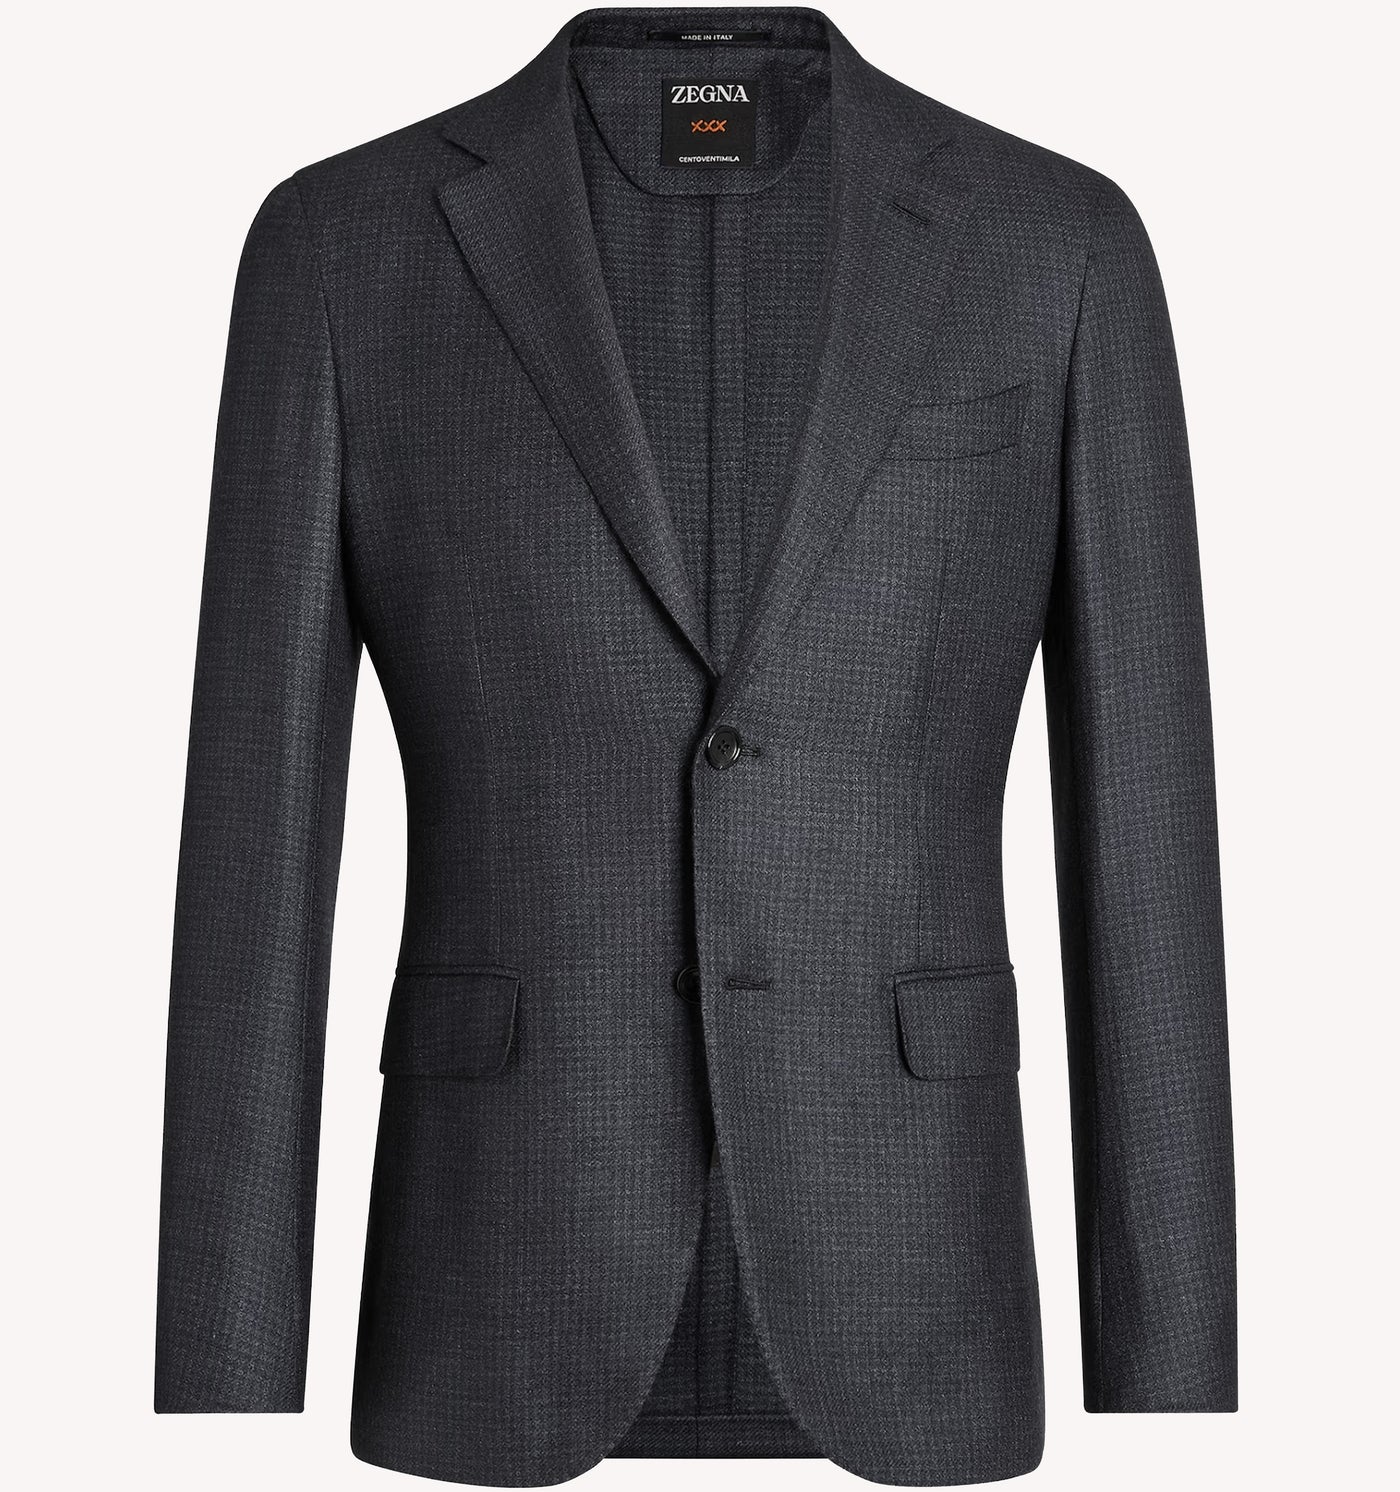 Zegna Micro Check Sport Coat in Charcoal